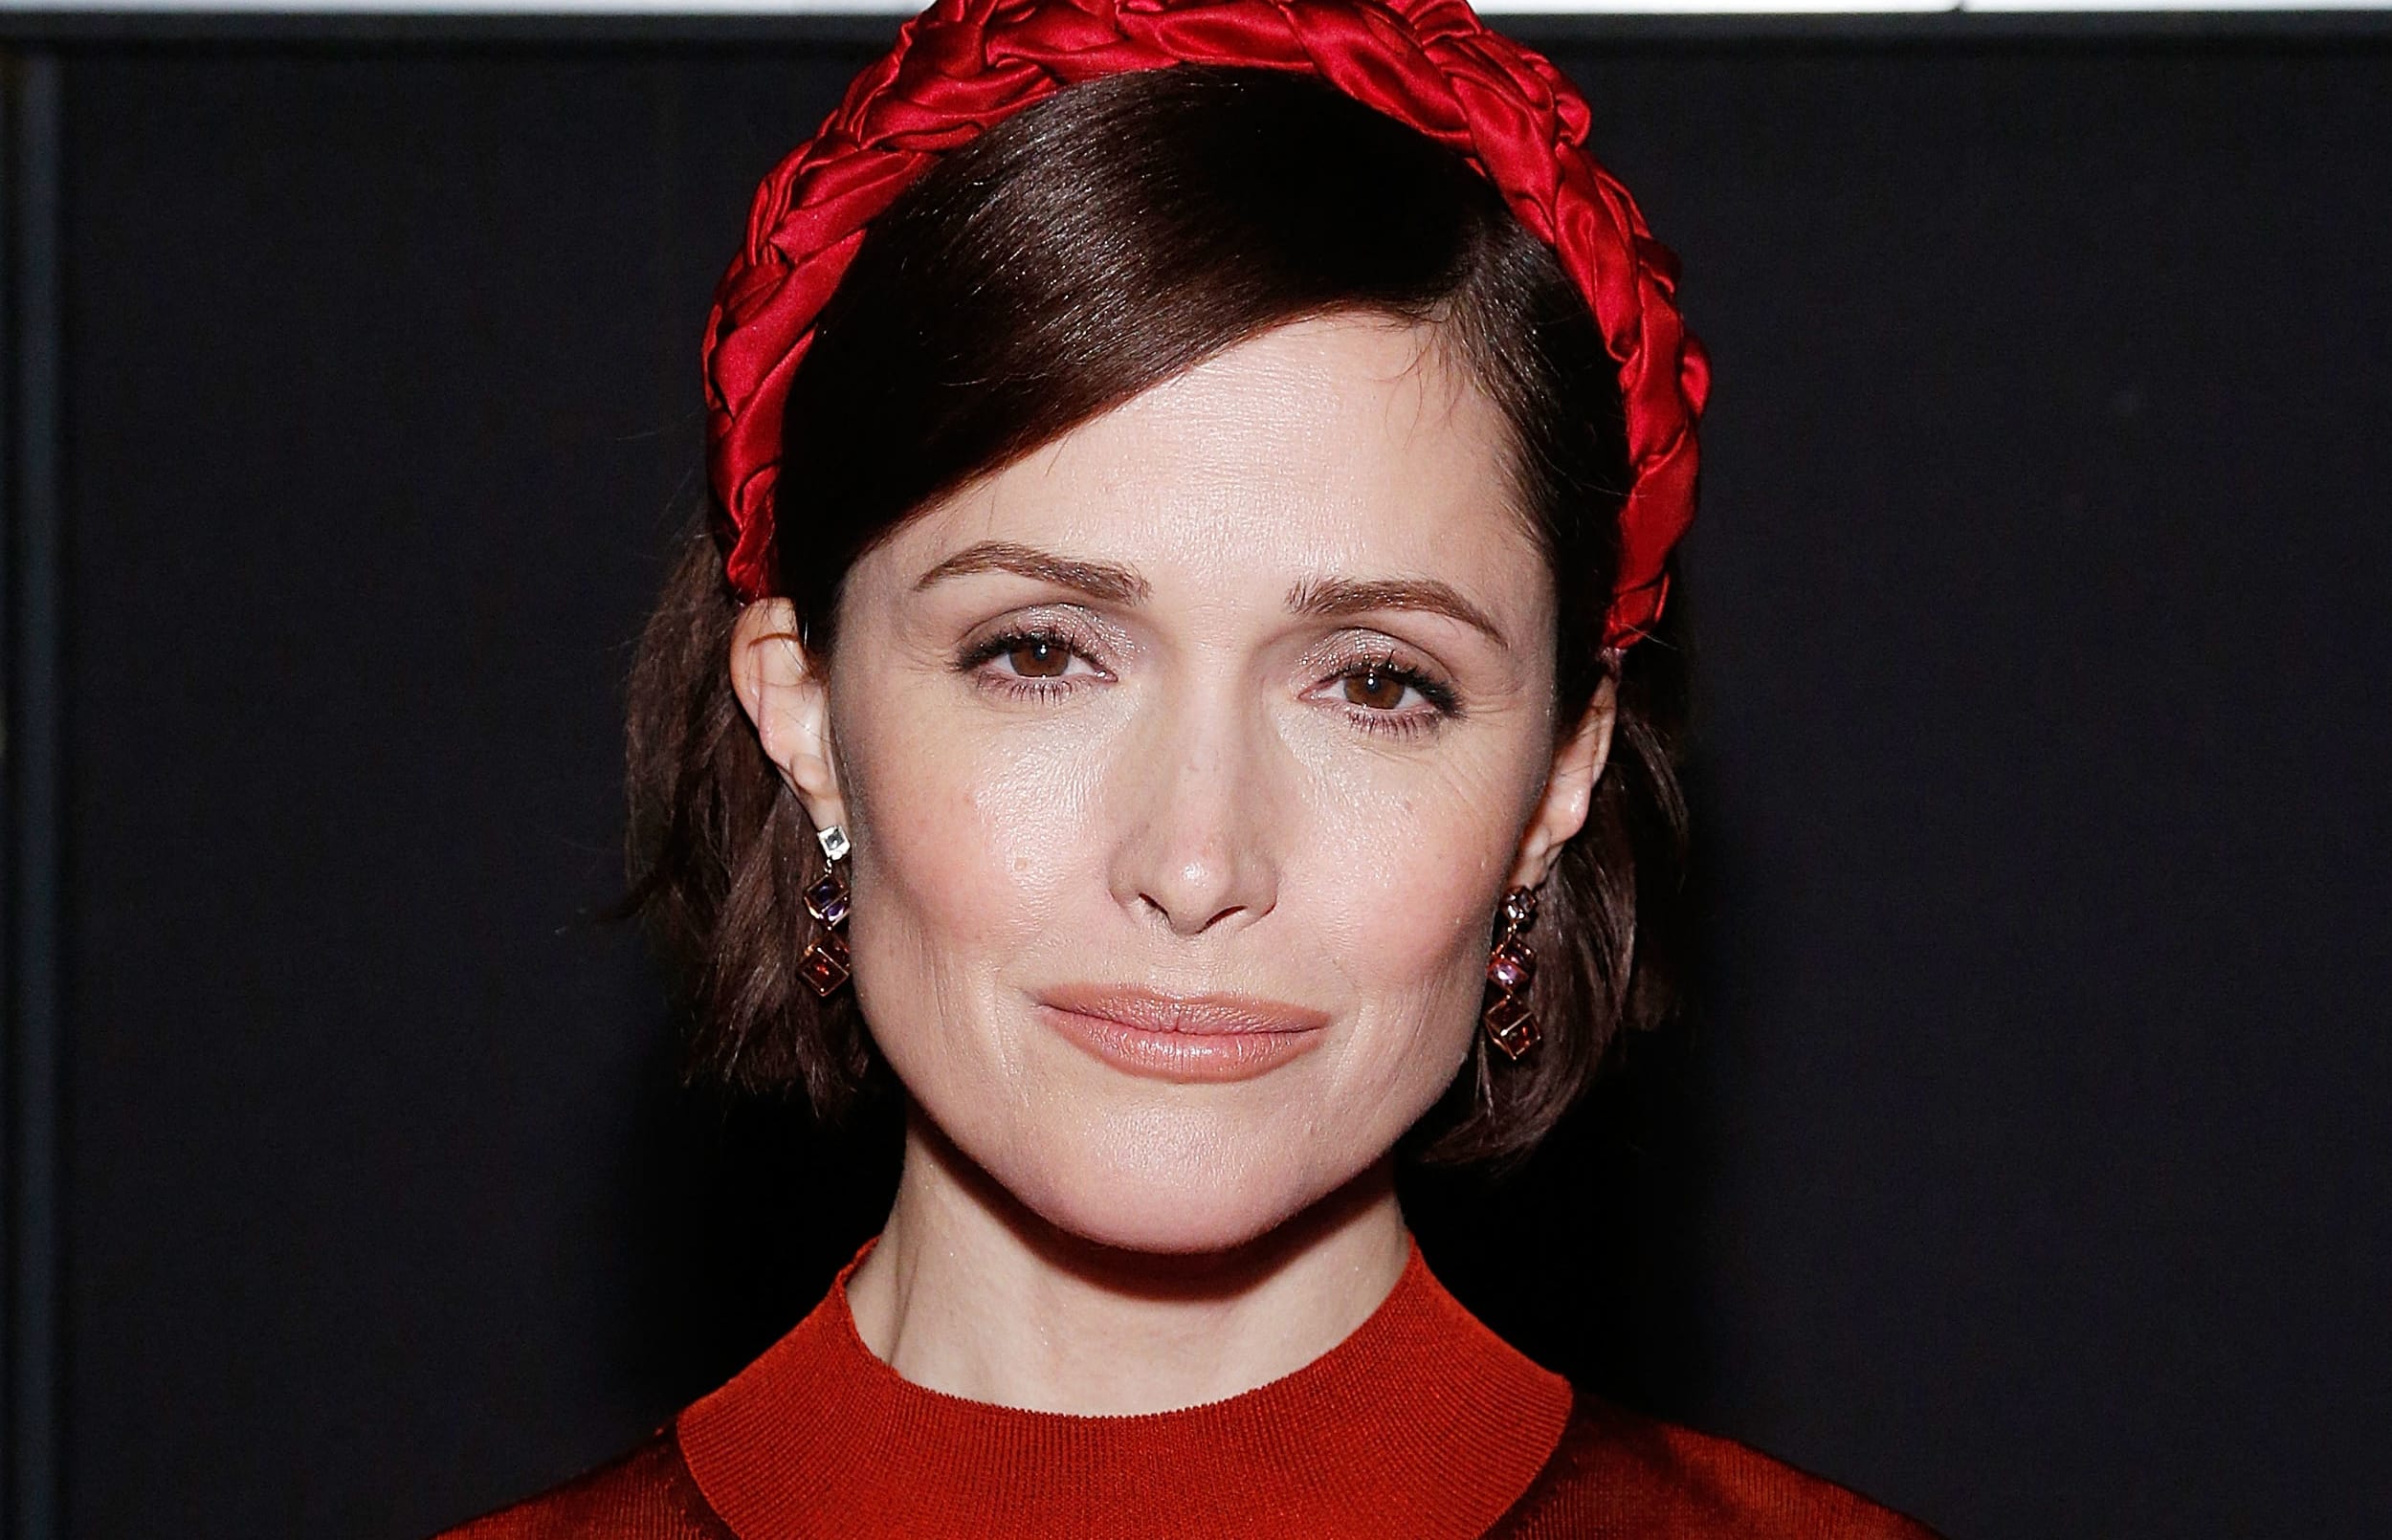 Actress Rose Byrne attends the BAM opening night after party for "Medea" at Public Records on January 30, 2020 in New York City.